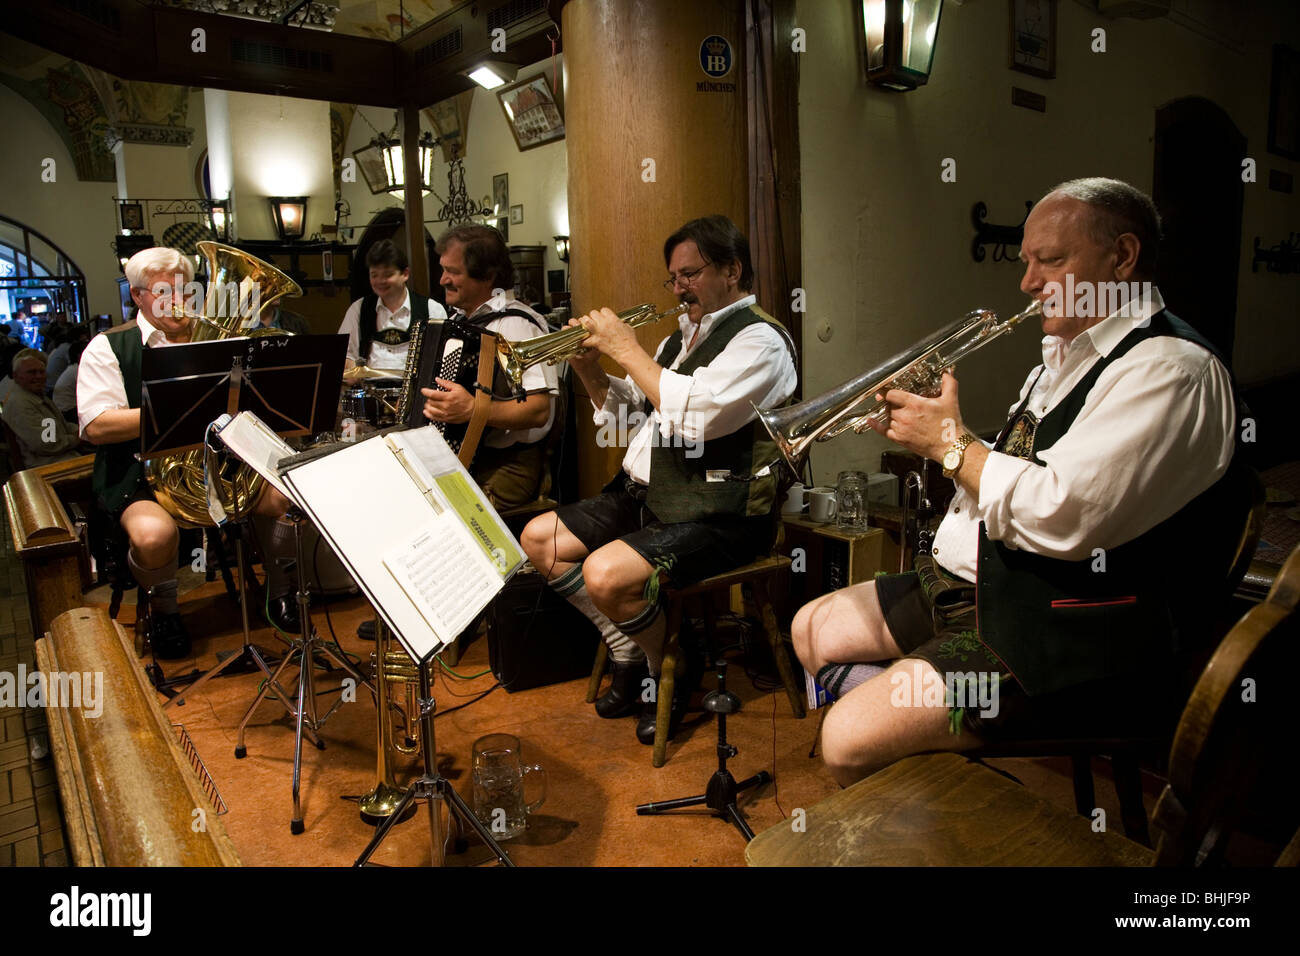 Traditional Bavarian music and atmosphere at the Hofbrauhaus am Platzl. Munich, Germany Stock Photo